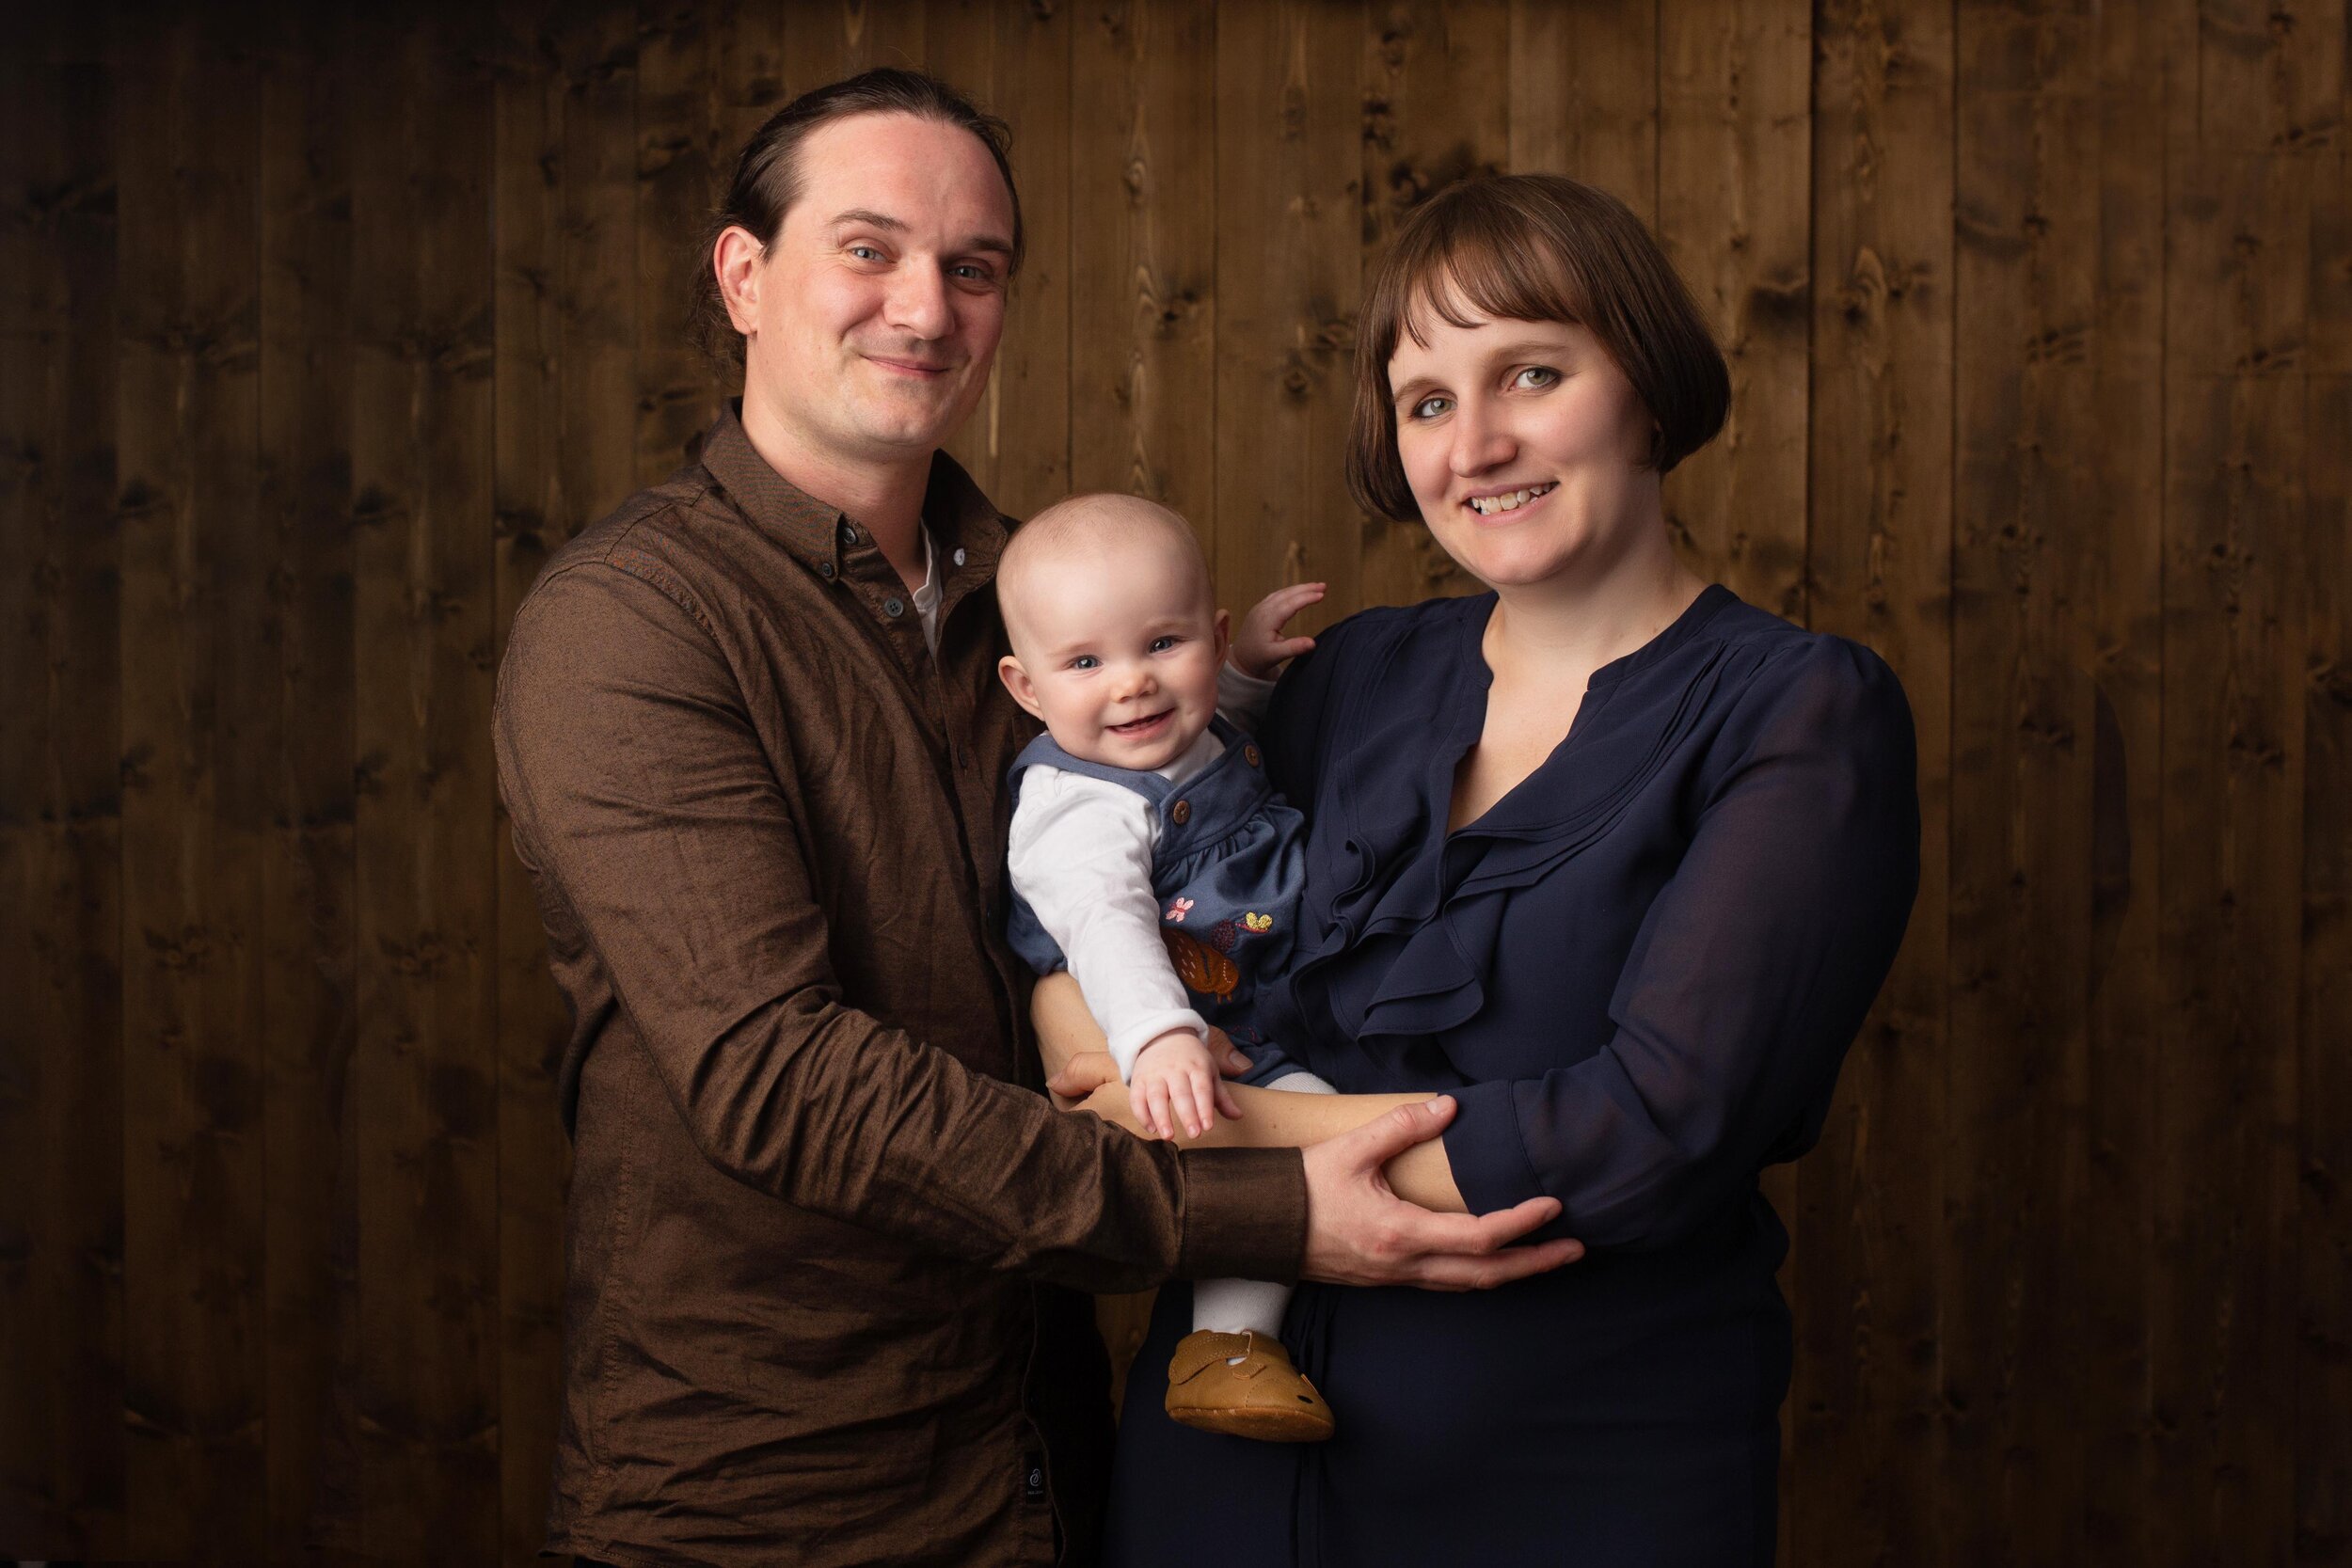 mom-dad-child-family-photography-willenhall-wolverhampton-family-session-lea-cooper-photography-wooden-backdrop.jpg